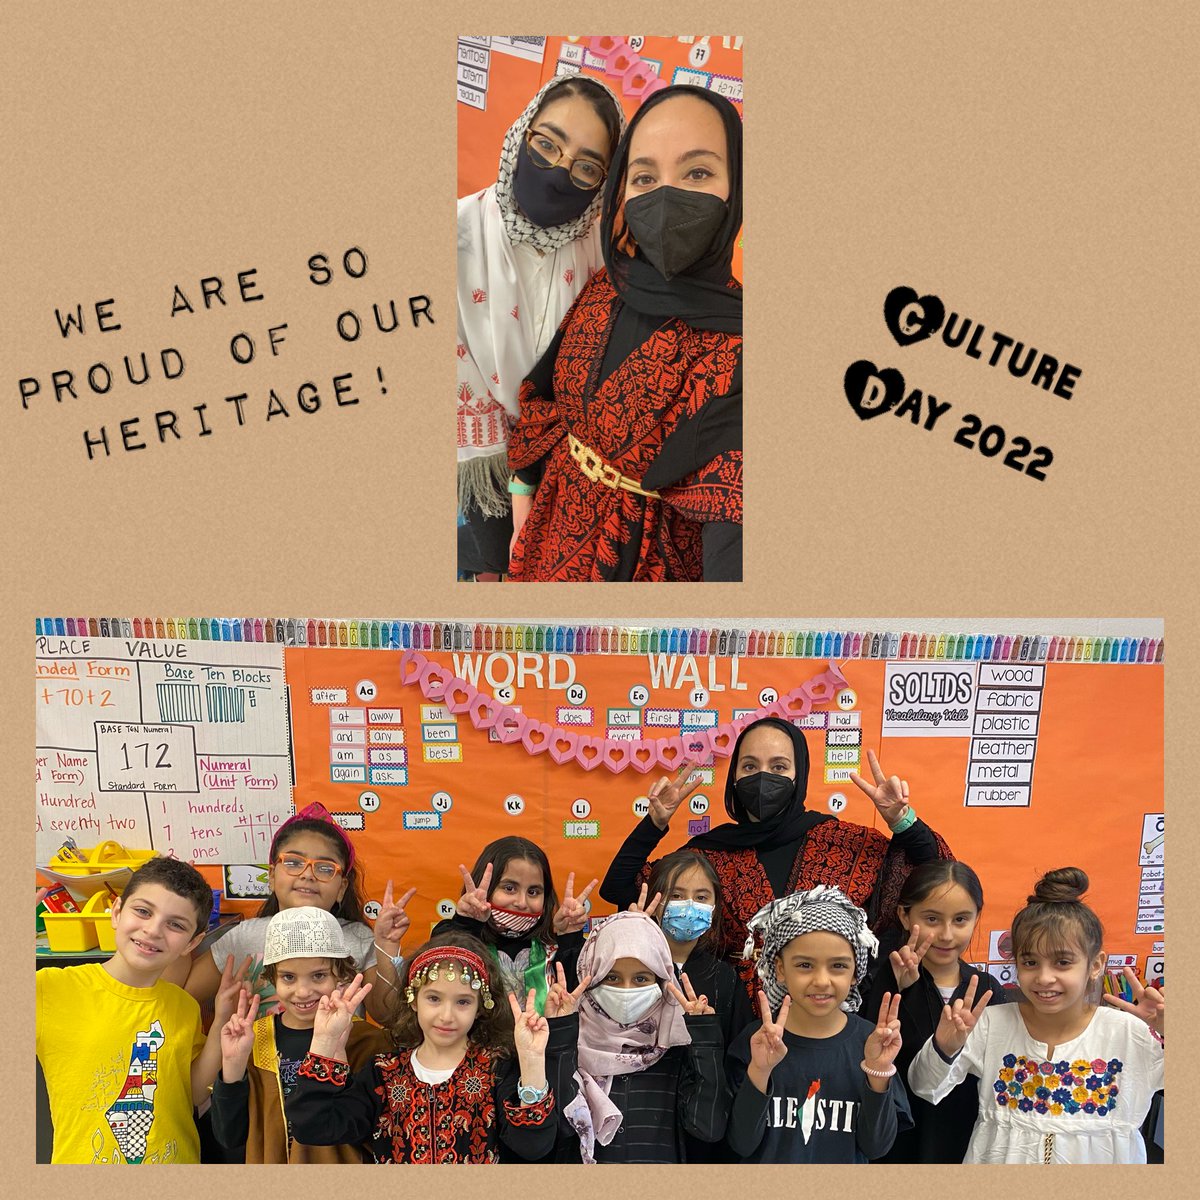 These #Mustangs are so happy to represent their culture! ⁦@OakRidgeNPD117⁩ #FreePalestine #CultureDay